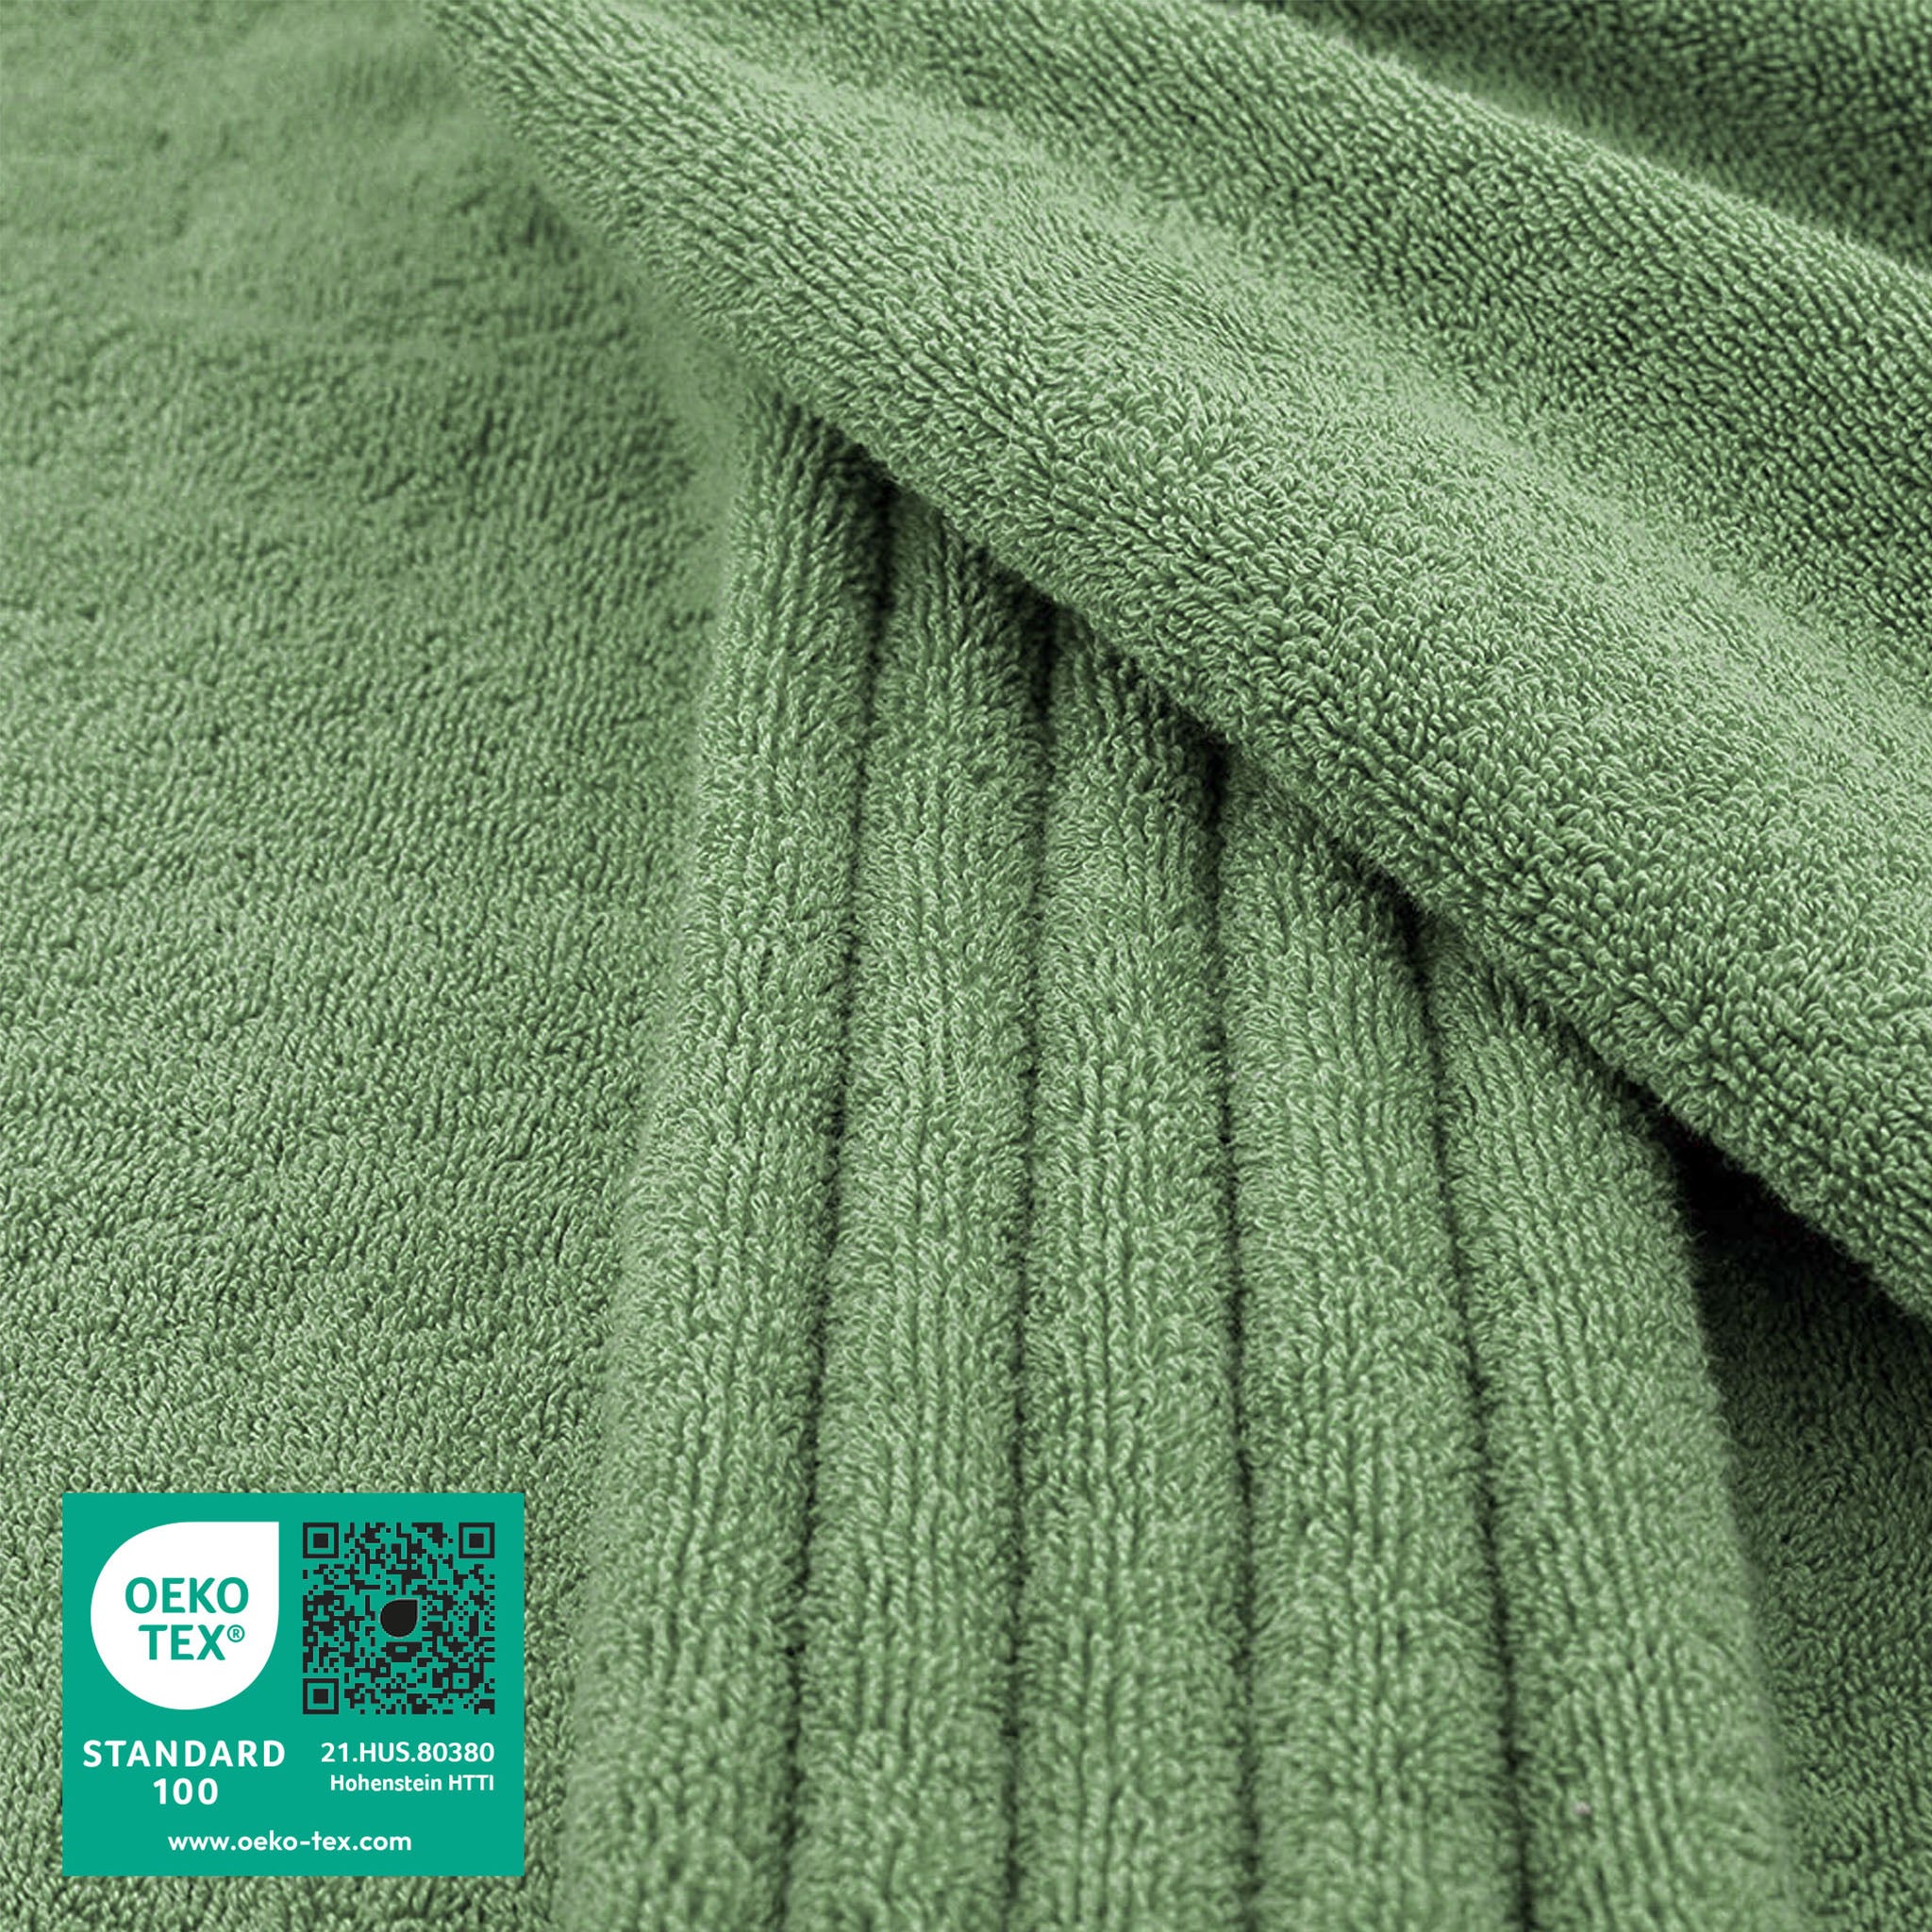 American Soft Linen 100% Ring Spun Cotton 40x80 Inches Oversized Bath Sheets sage-green-2